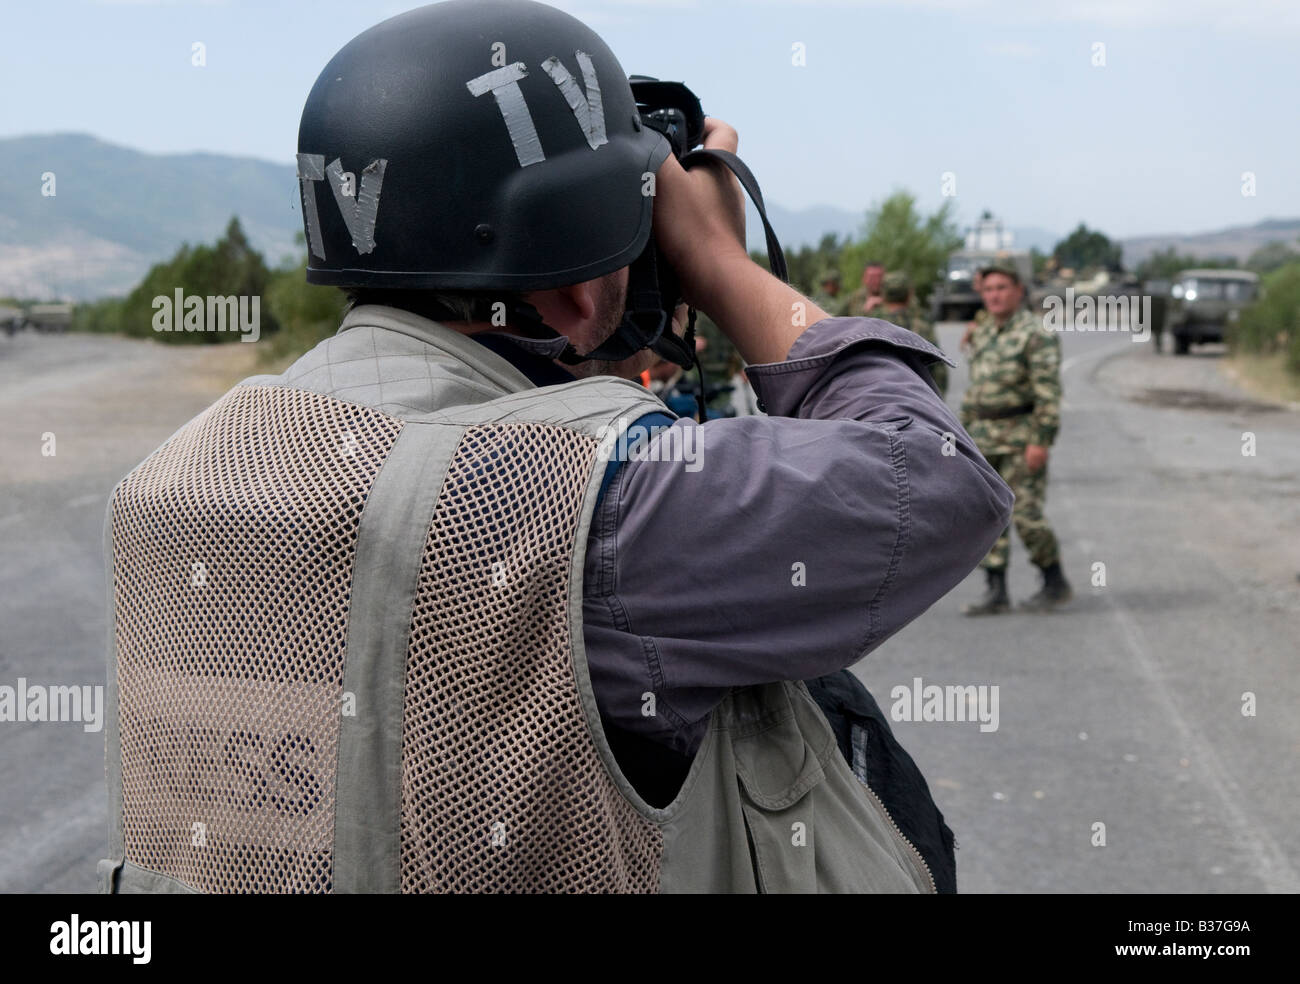 A photojournalist wearing vest marked 'Press' and helmet marked 'TV' photographing Russian troops during the Russo-Georgian War August 2008 Stock Photo